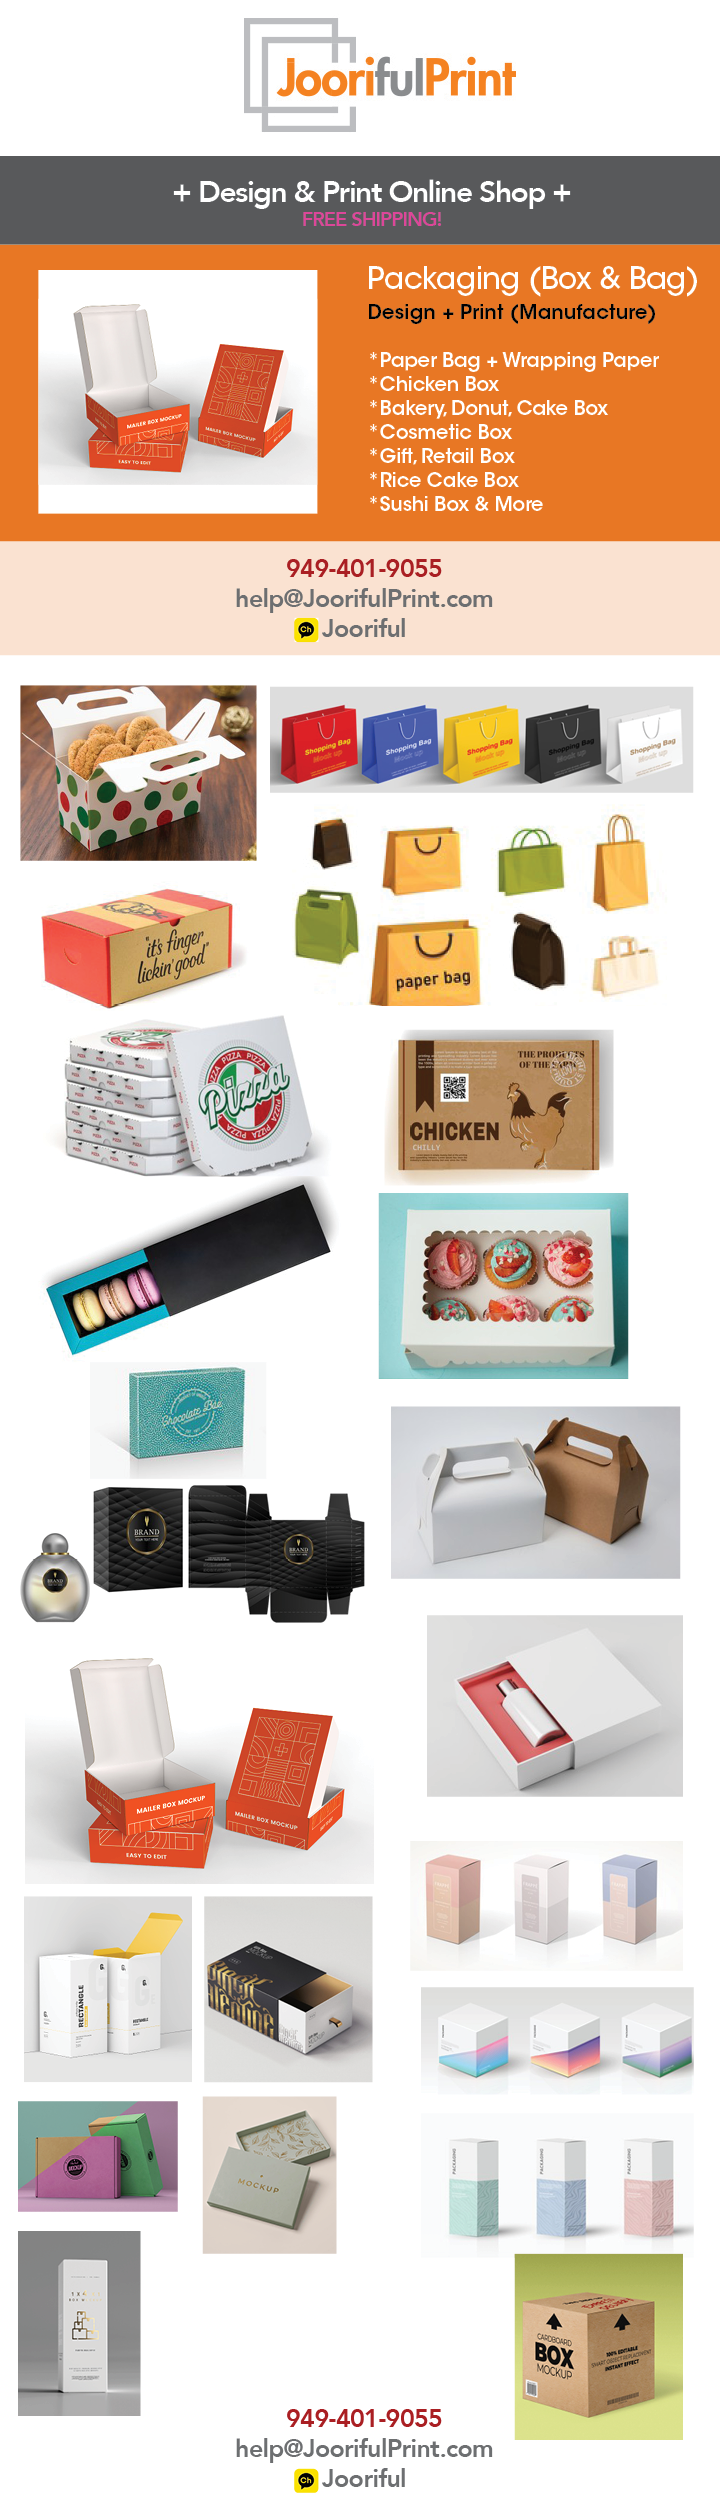 AD_jooriful_design_ad_080122_Packaging.png